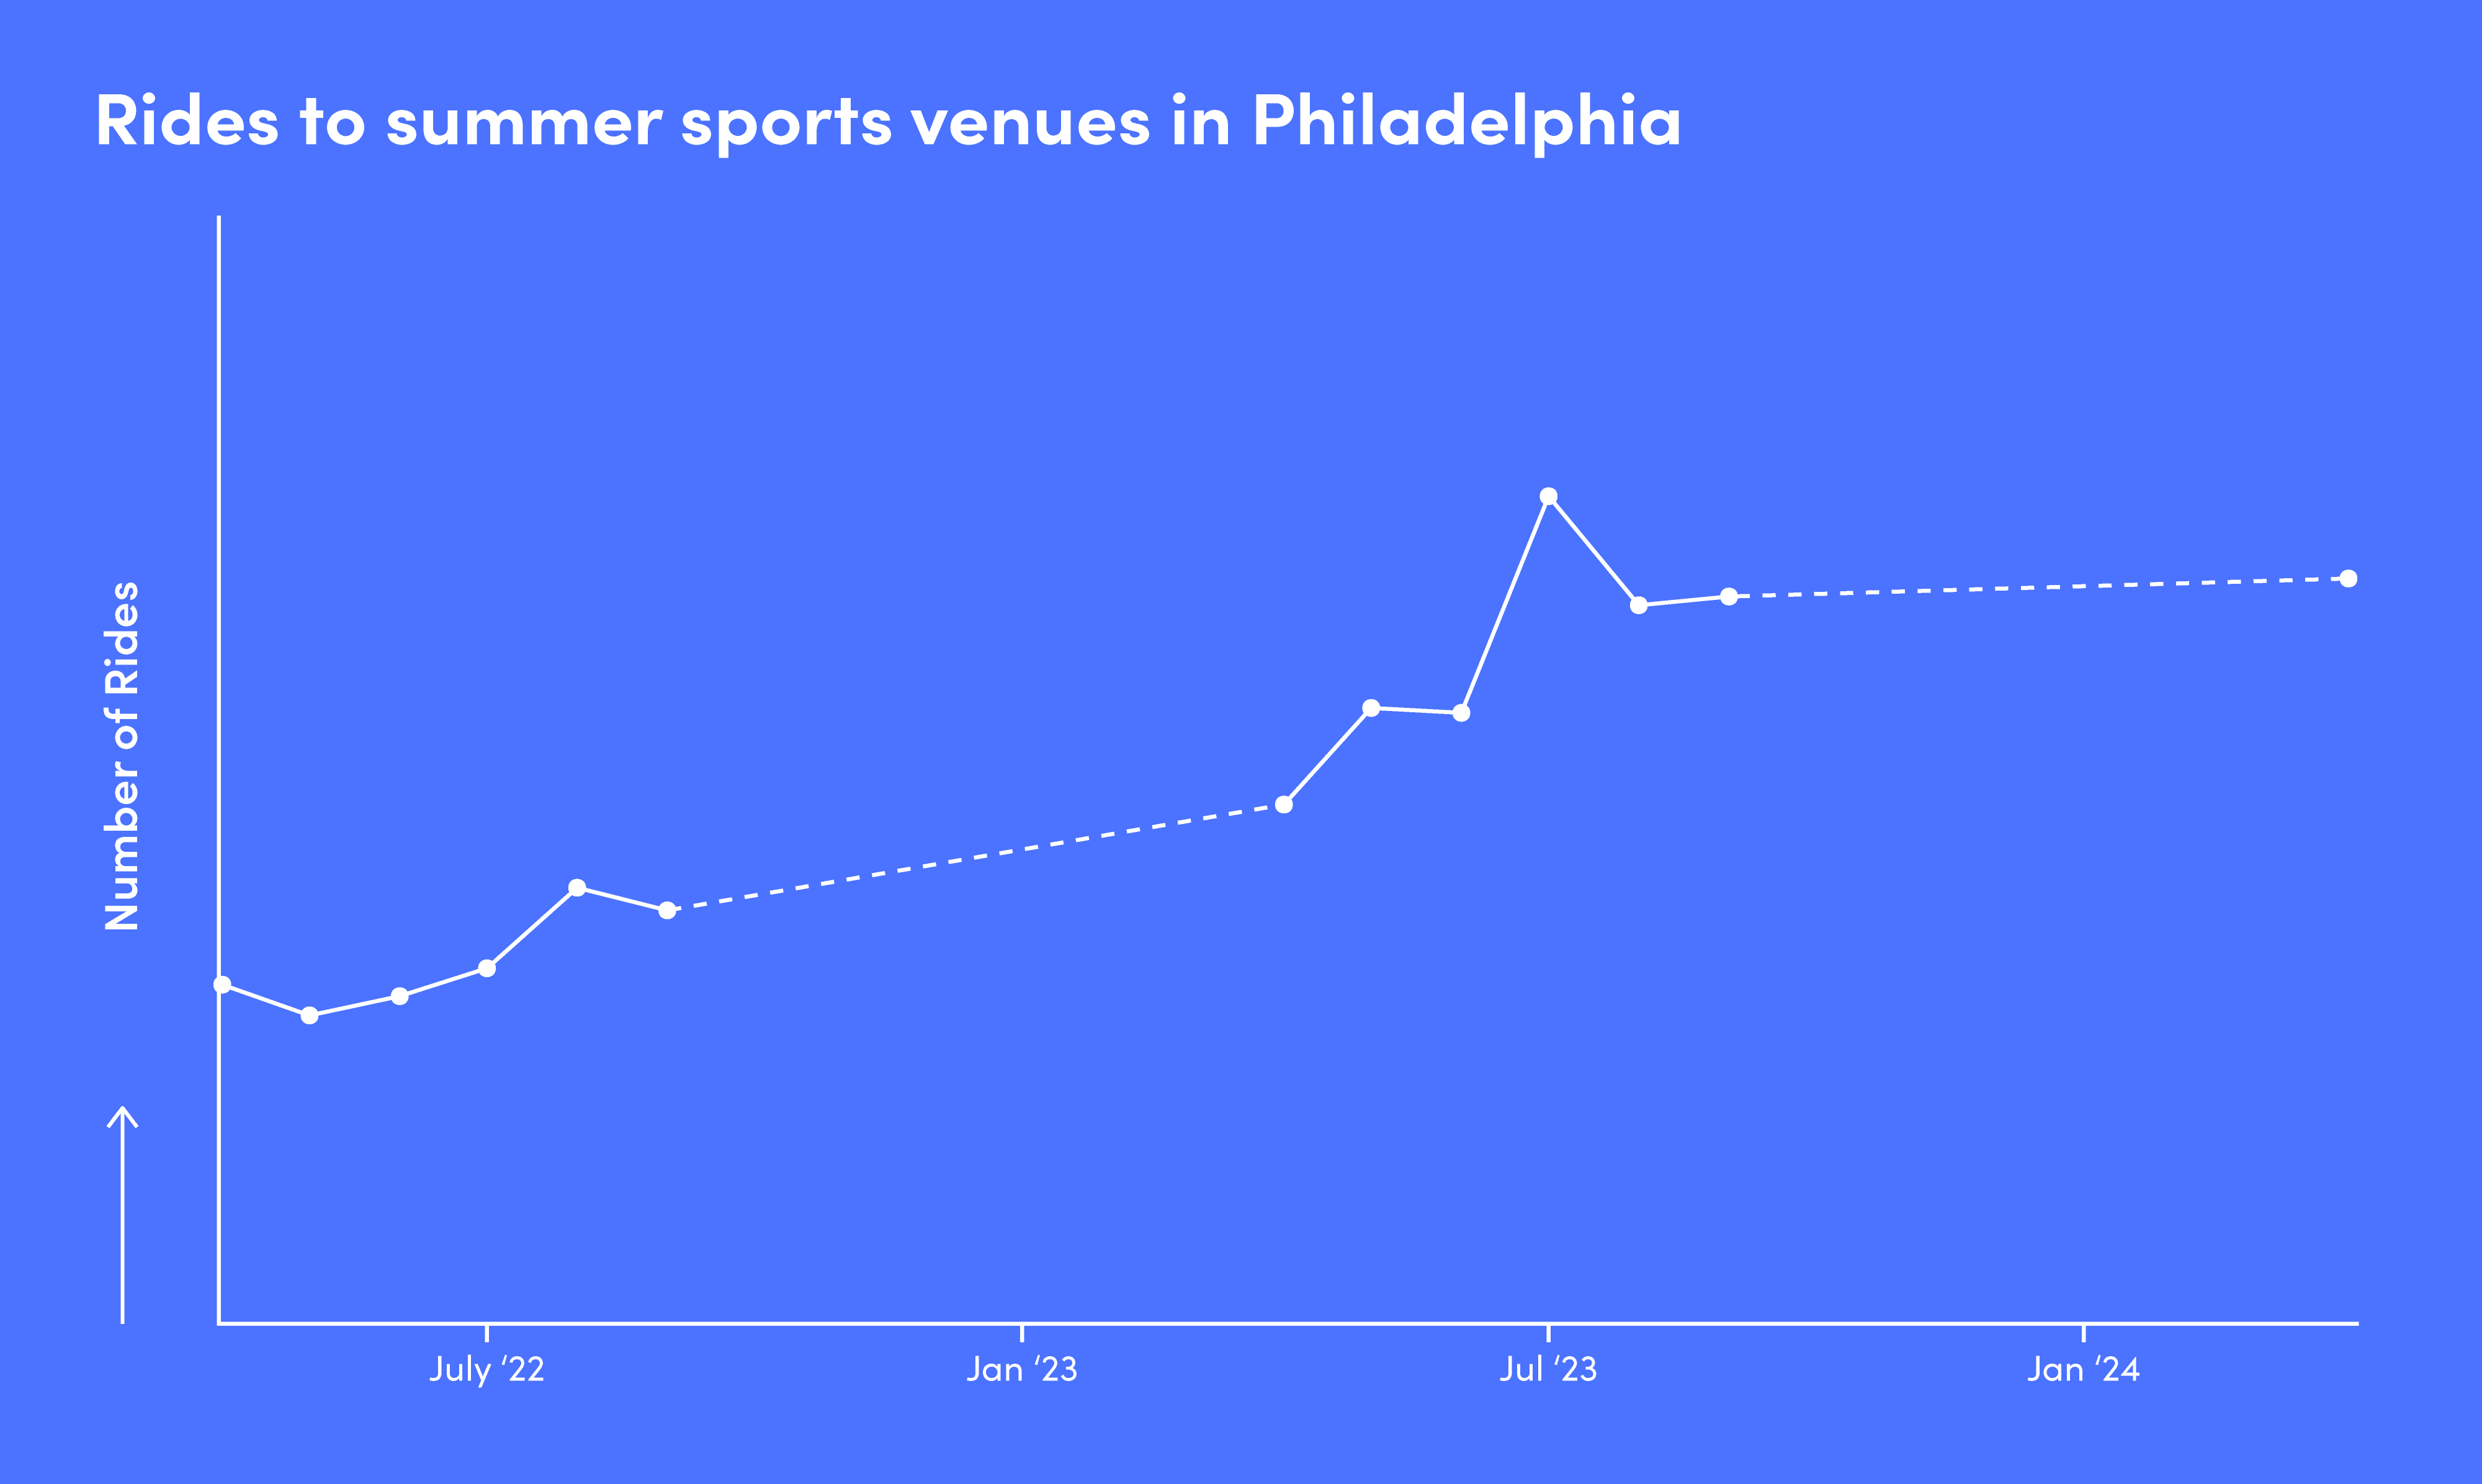 Chart showing rides to summer sports venues in Philadelphia.